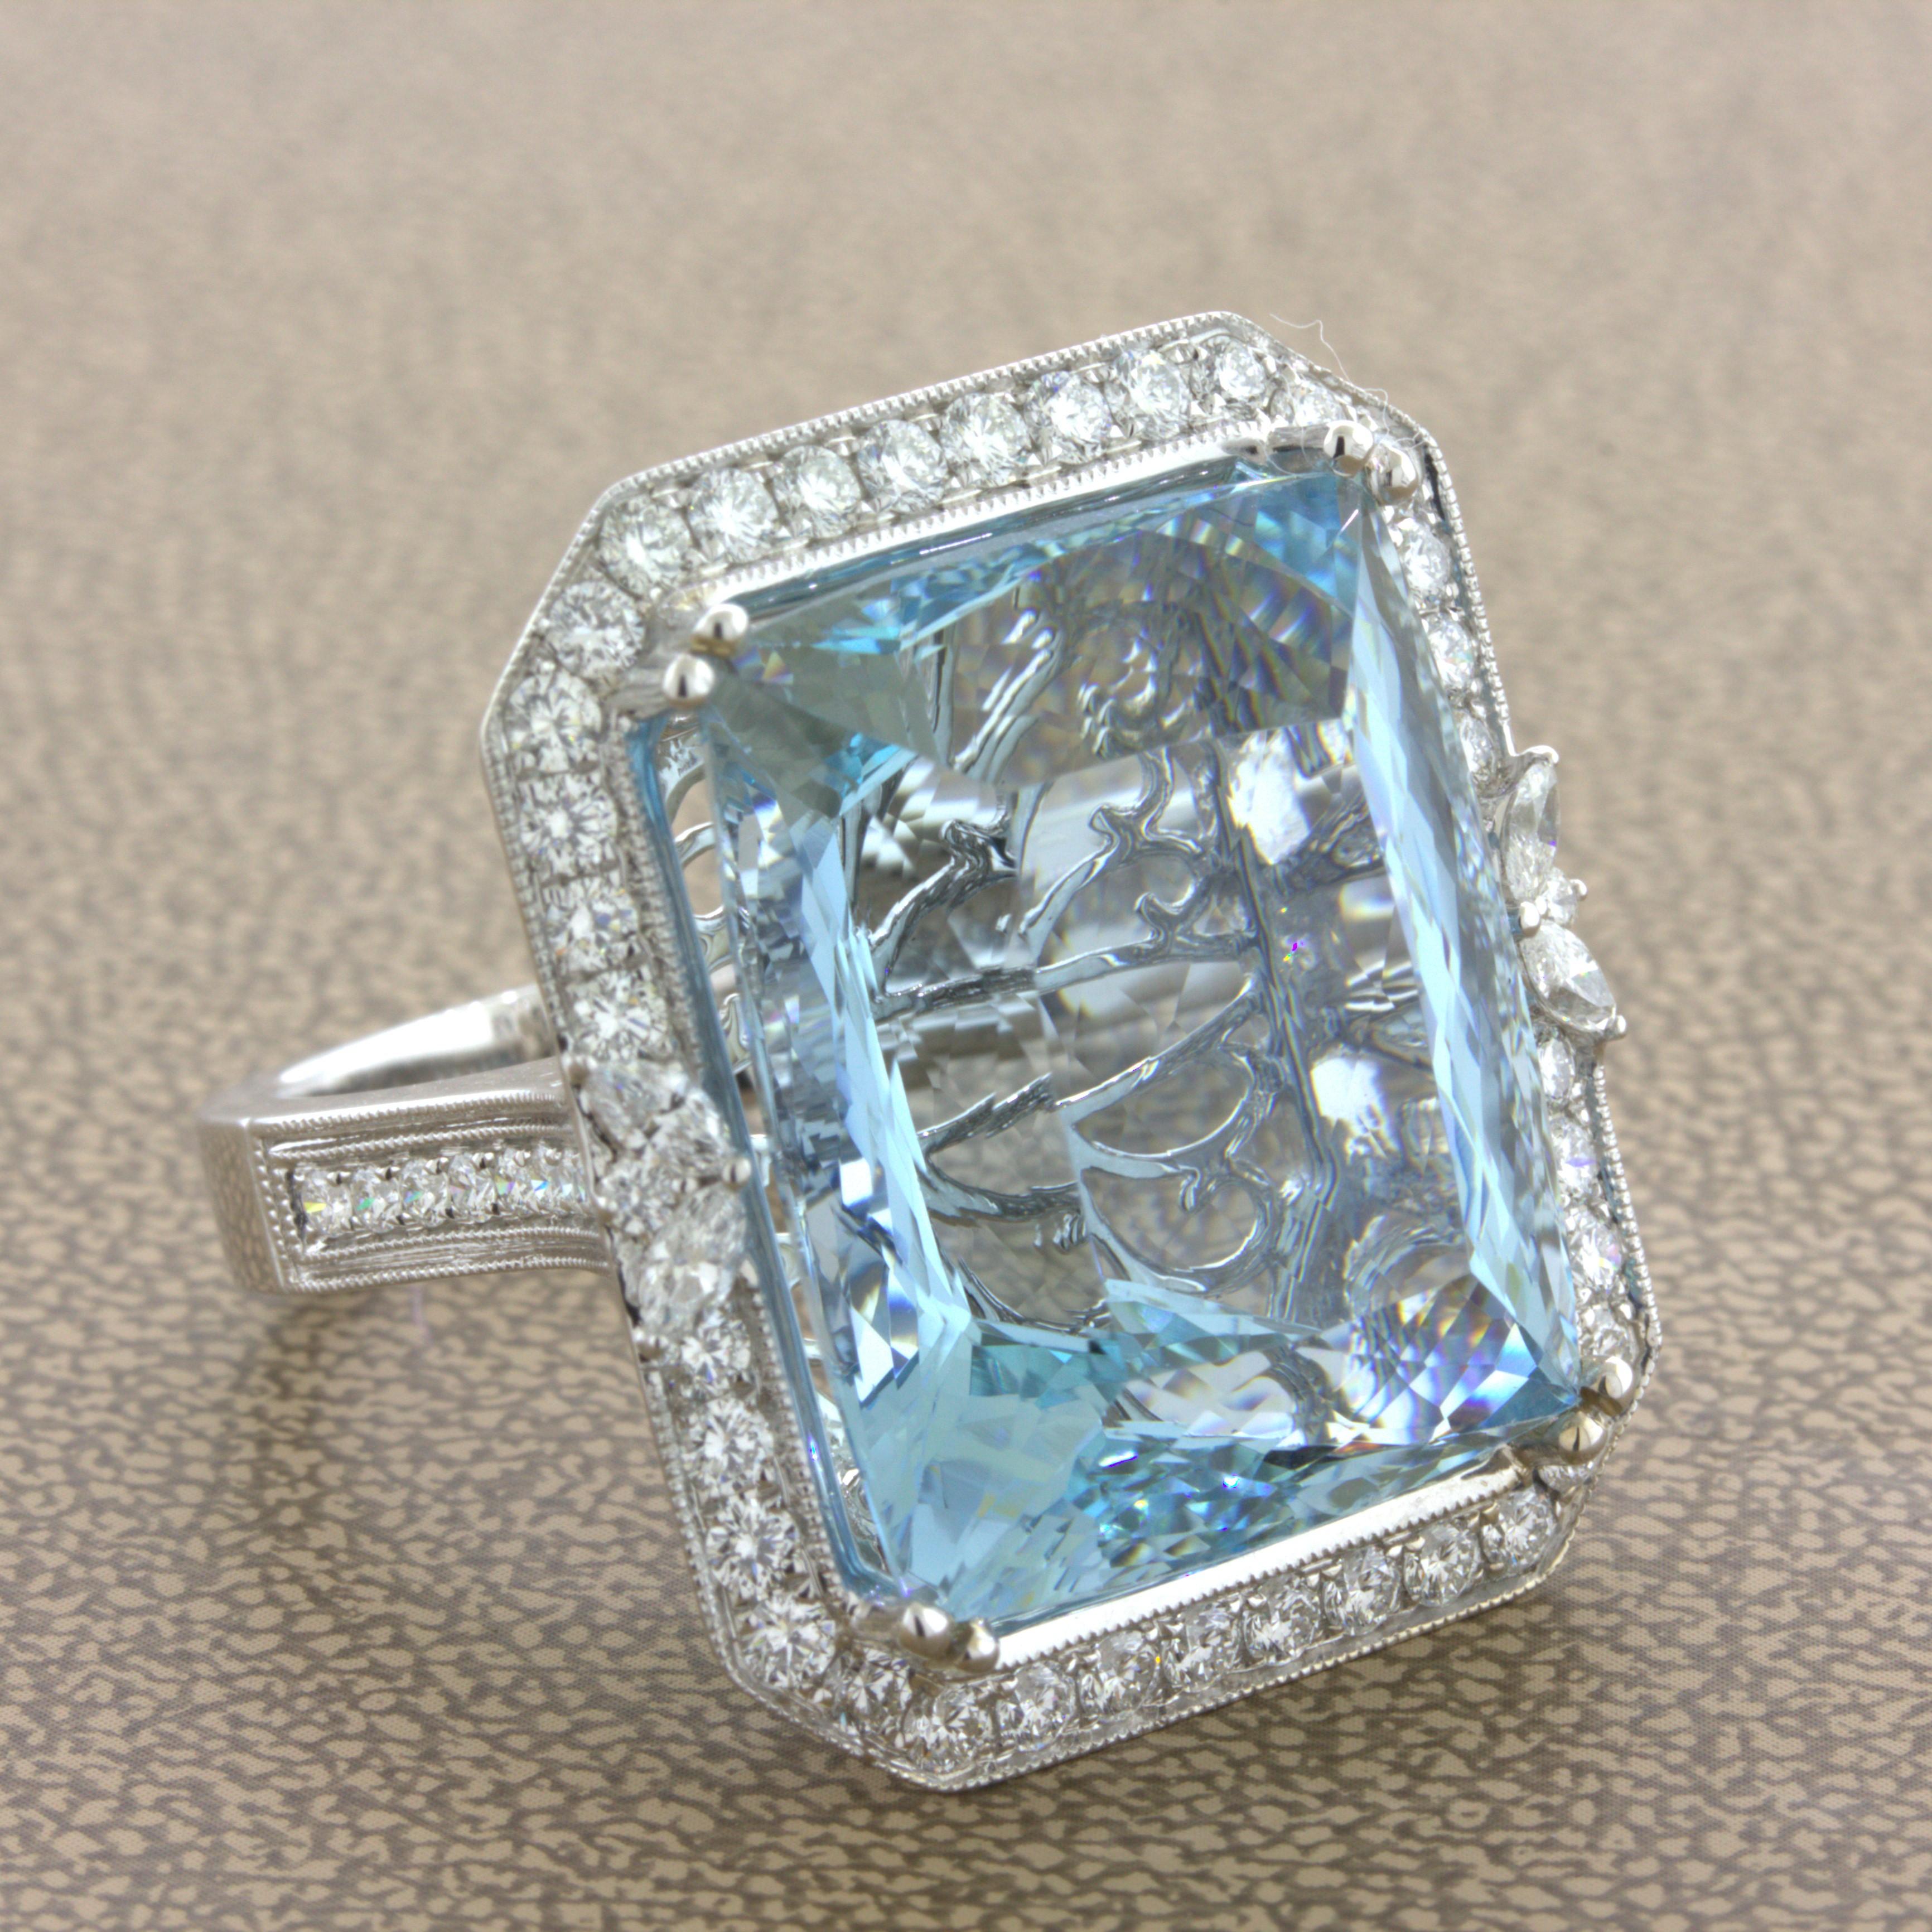 A large and stunning aquamarine diamond cocktail ring. The massive aquamarine weighs an impressive 33.68 carats and has a rich sea-blue color which aquamarine is known for. Surrounding the fine gem are 1.47 carats of bright white diamonds which add